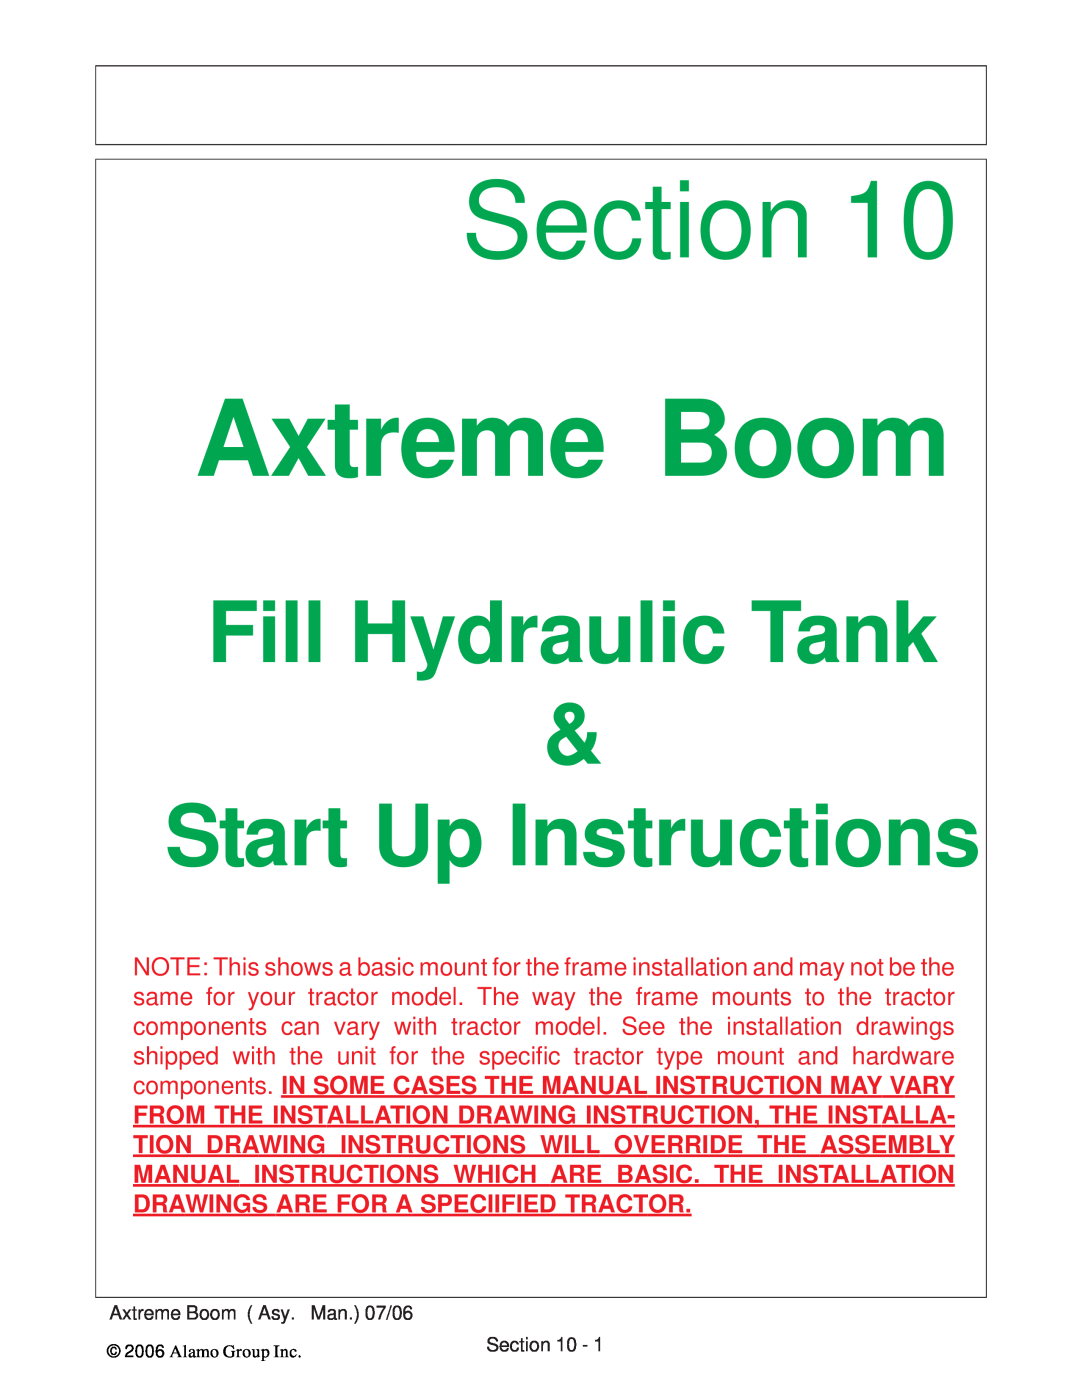 Alamo 02984405 instruction manual Fill Hydraulic Tank, Start Up Instructions, Section, Axtreme Boom Asy. Man. 07/06 